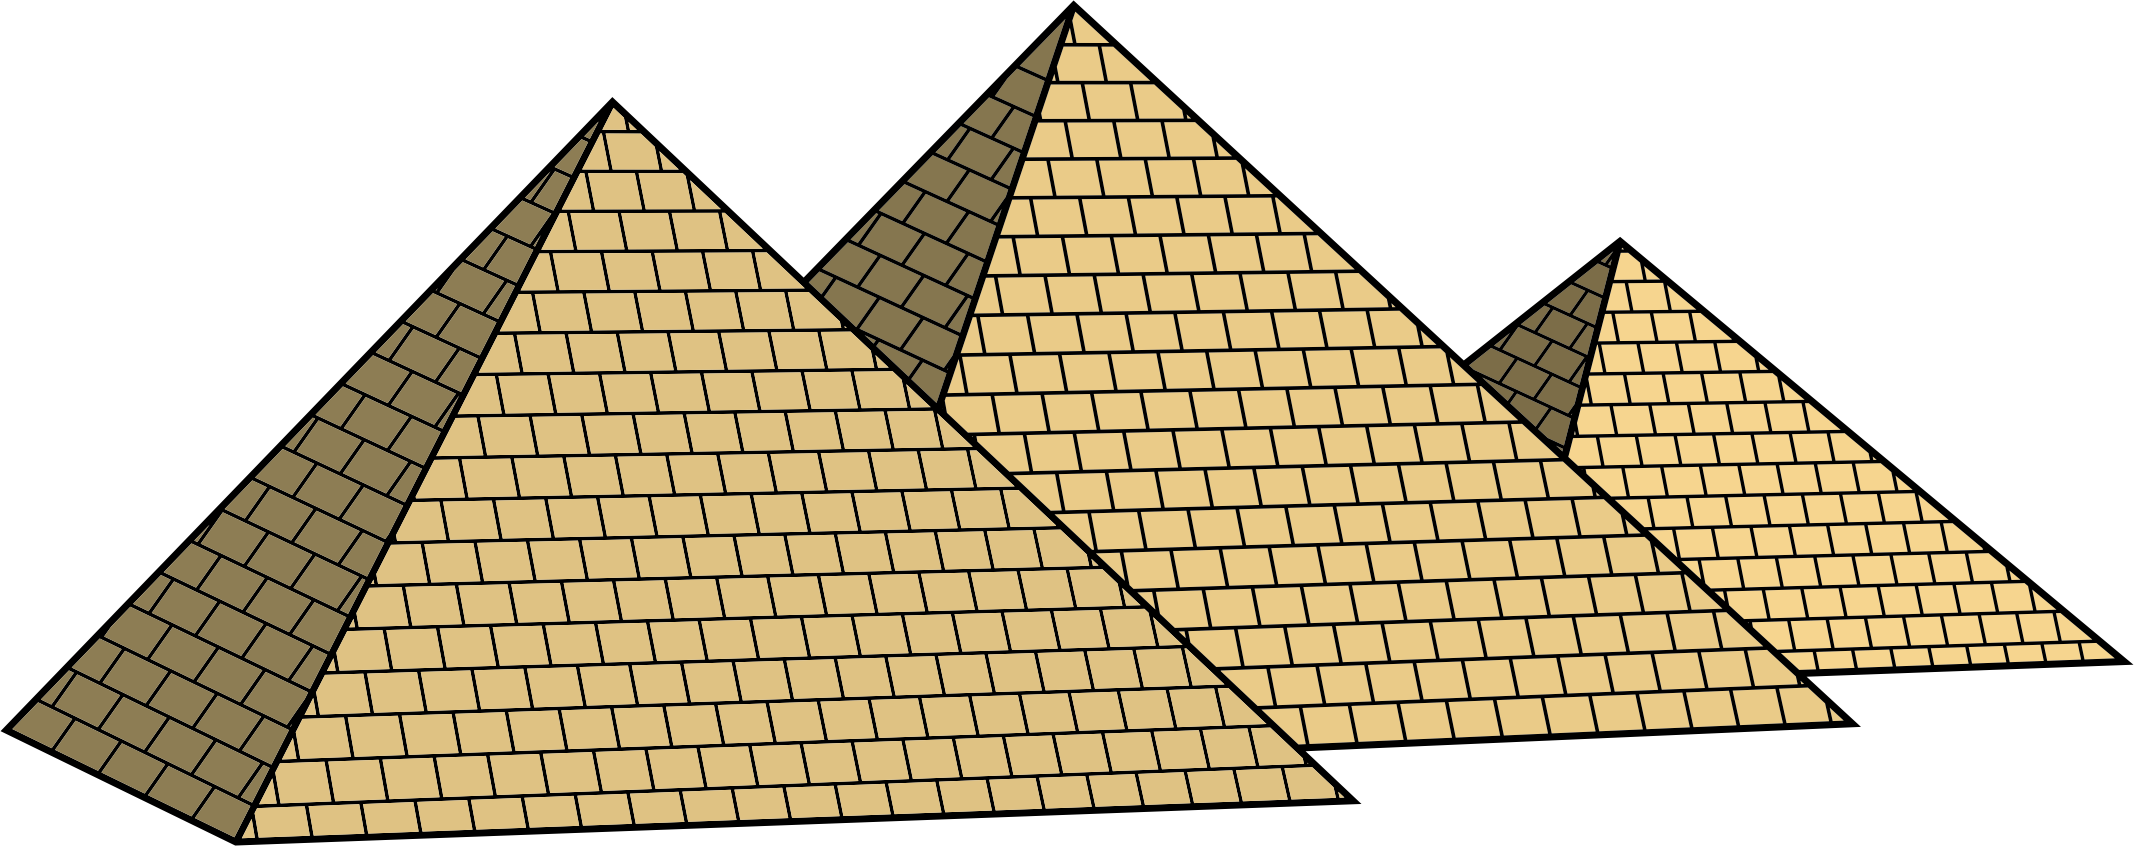 Pyramid PNG Background Image